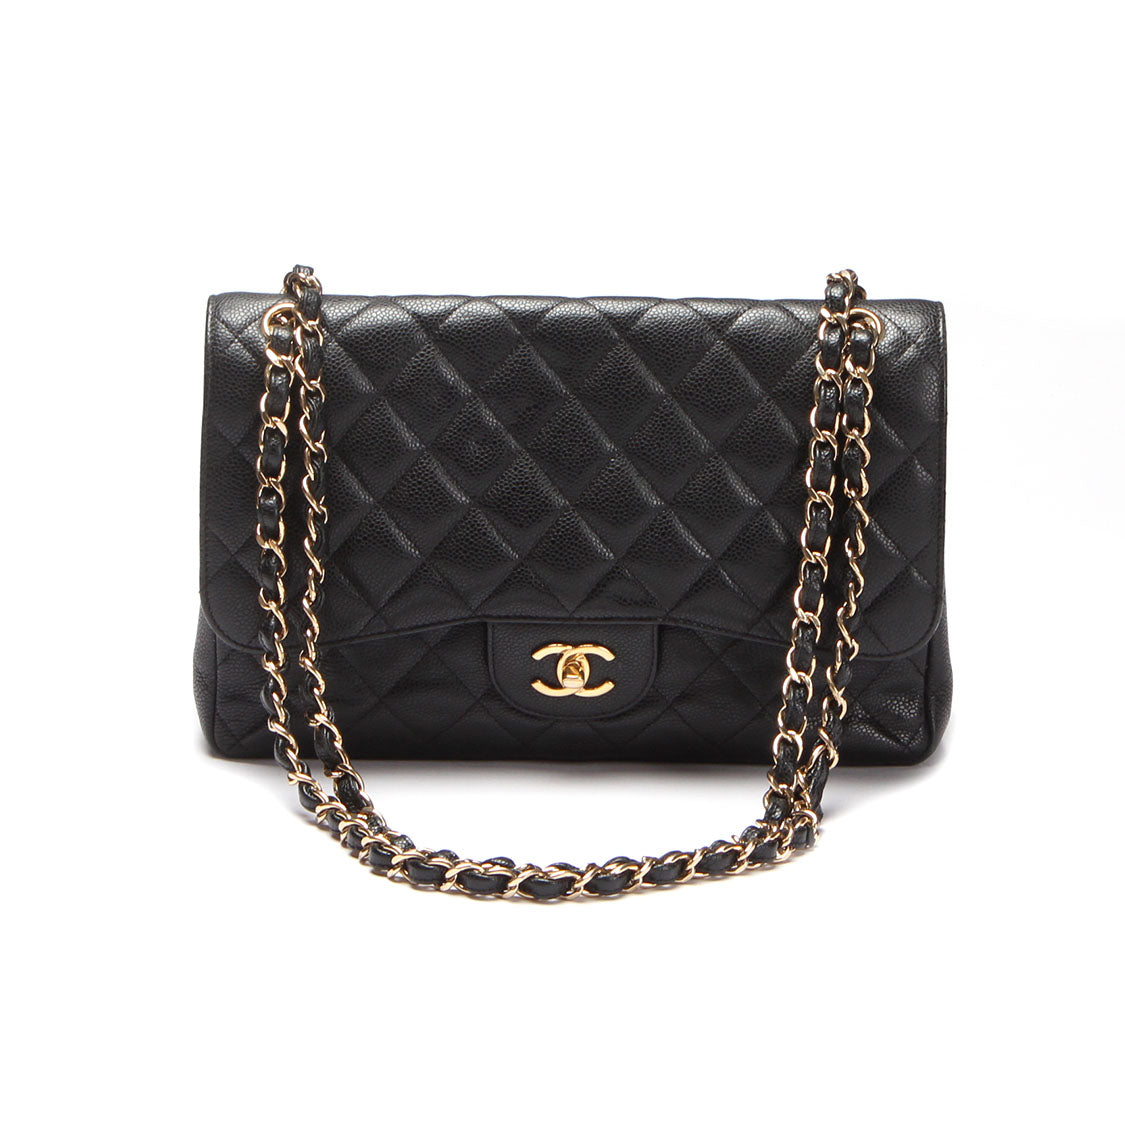 Chanel Caviar Jumbo Classic Flap Bag Leather Shoulder Bag in Excellent condition